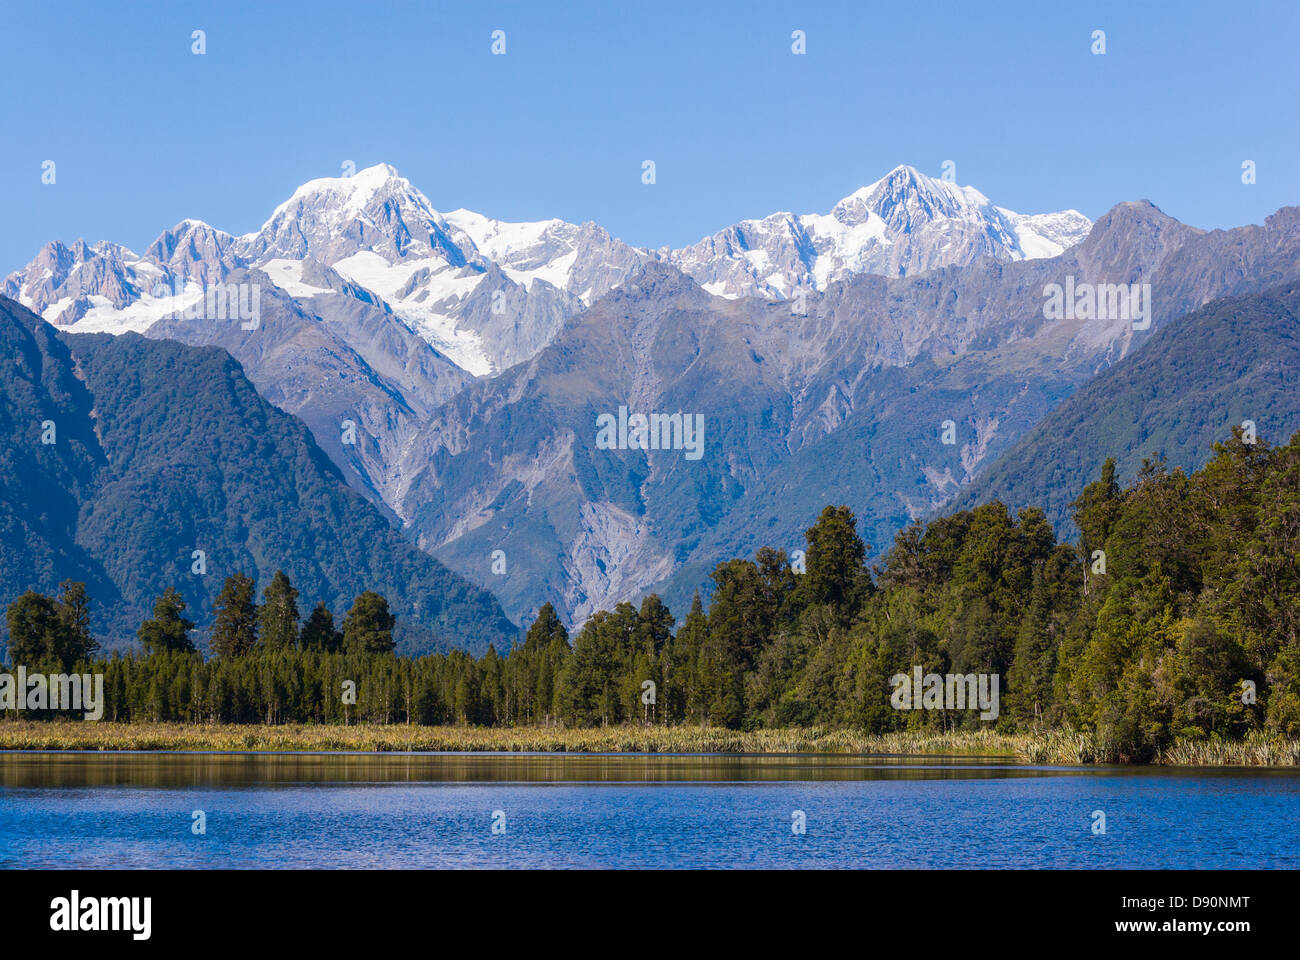 Aoraki Mount Cook (3754m) is the highest mountain in New Zealand and is seen here from Lake Matheson Stock Photo